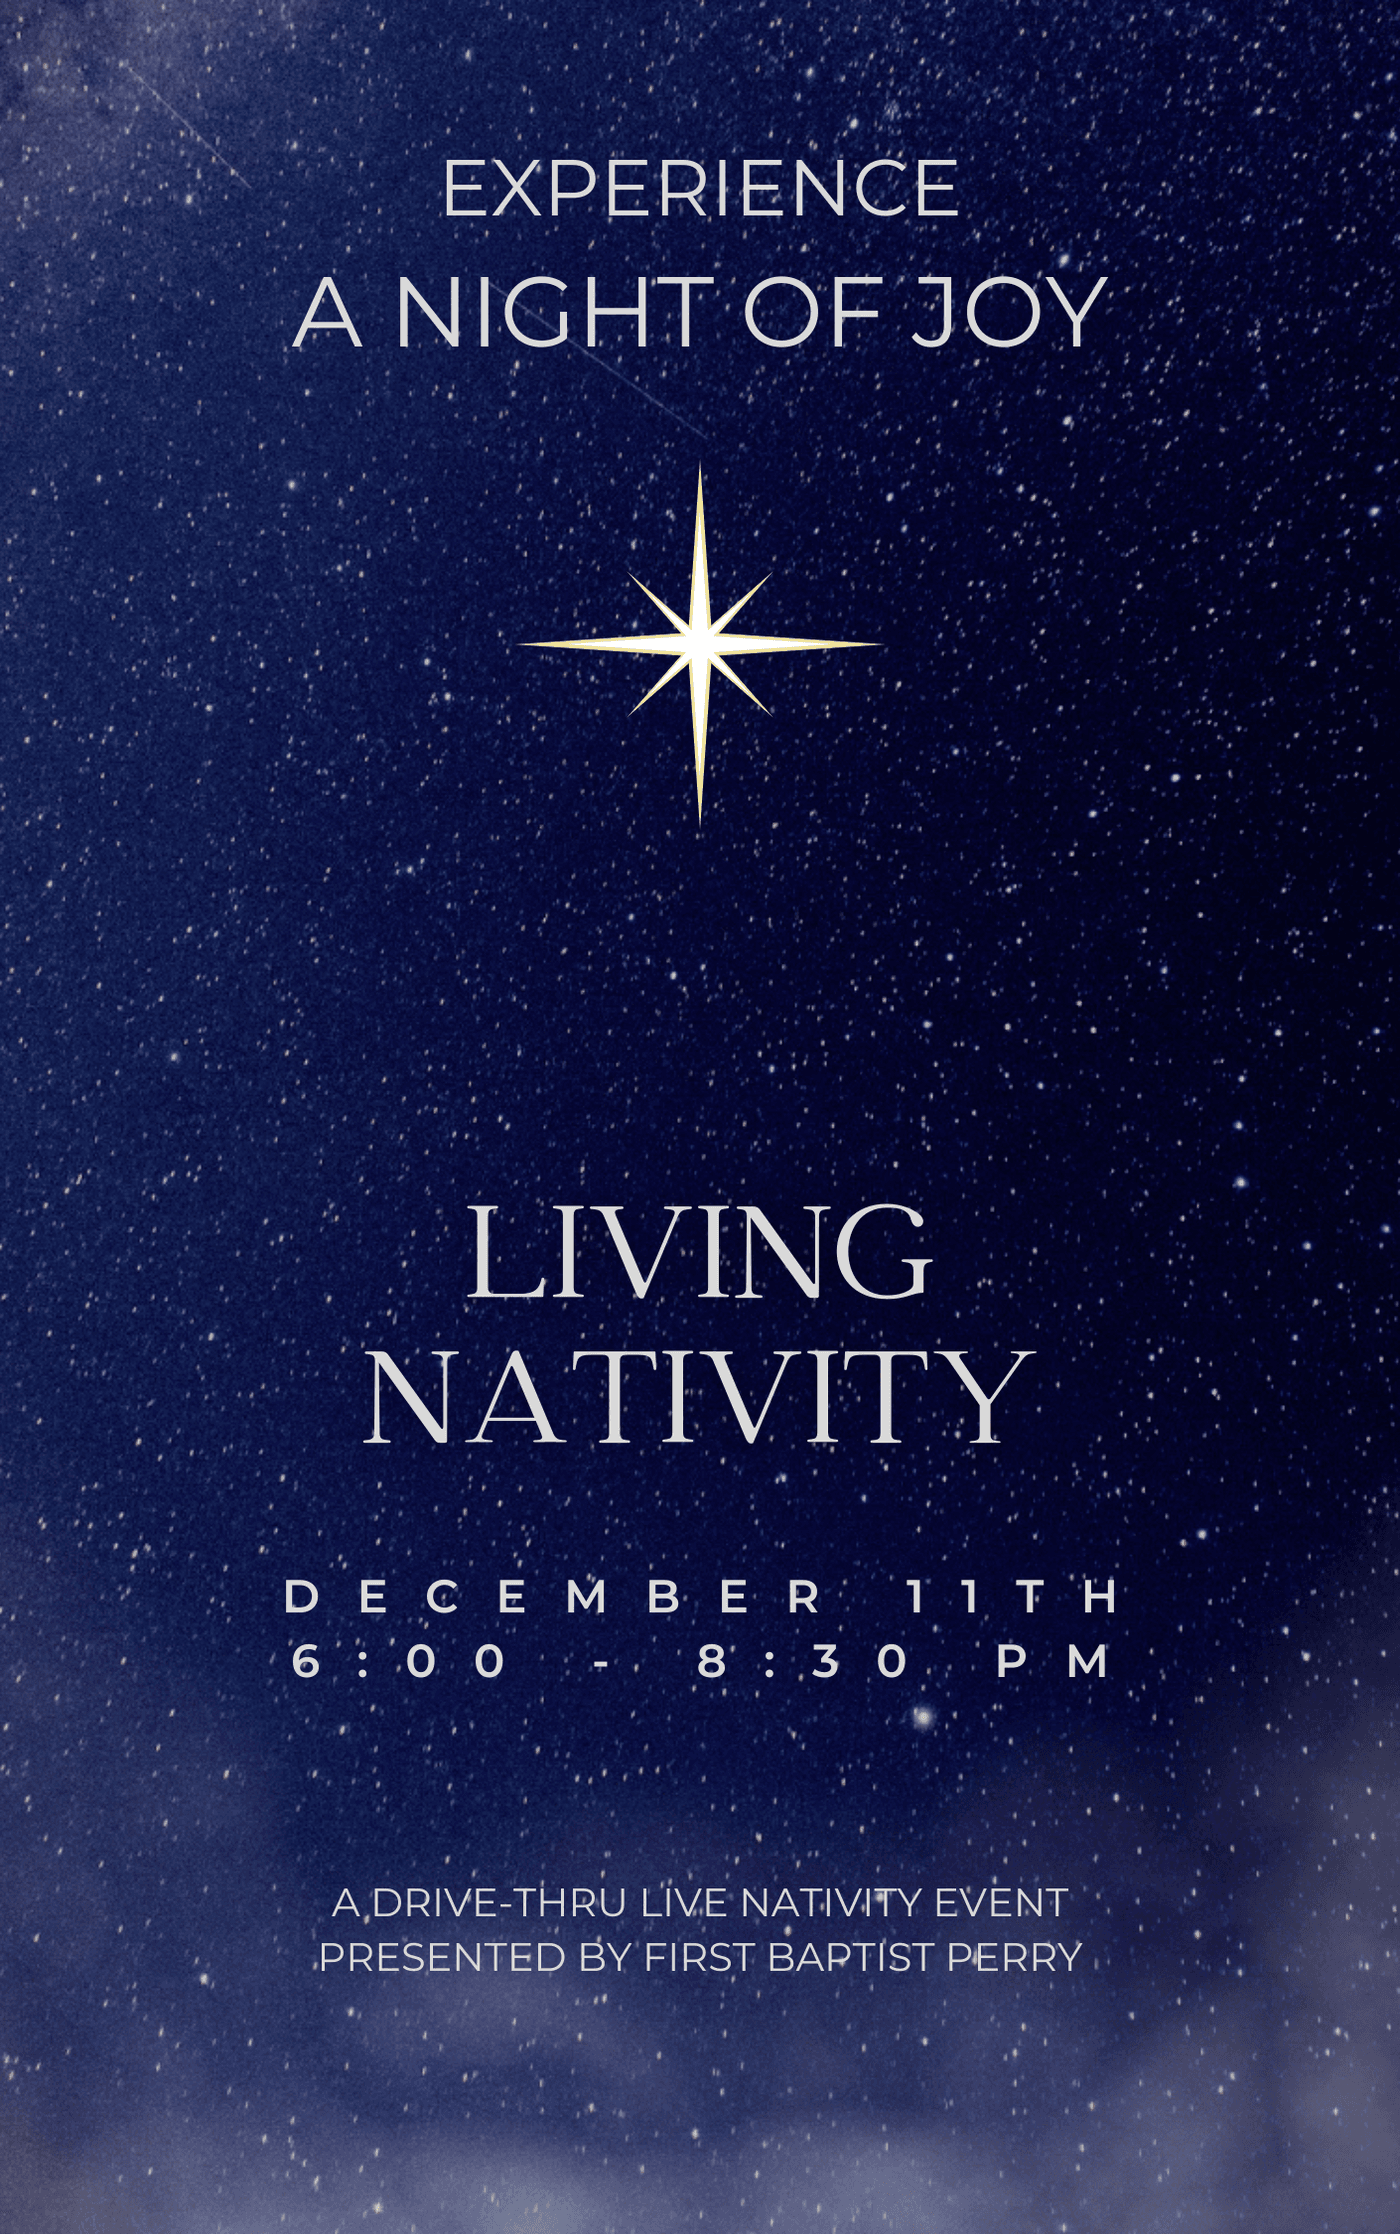 A night of joy living nativity return refresh and remember